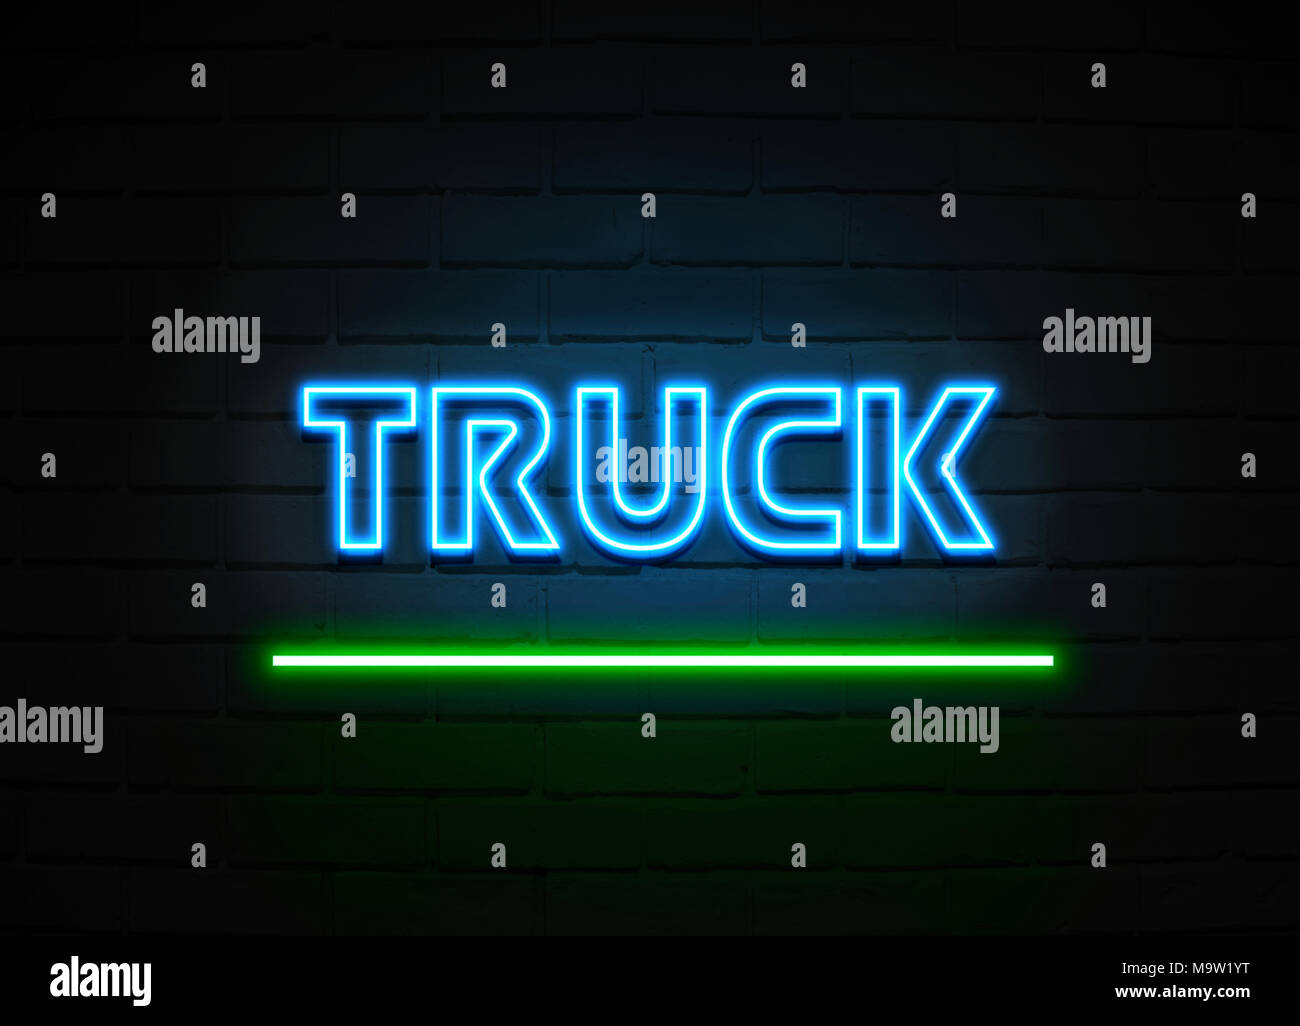 Truck neon sign - Glowing Neon Sign on brickwall wall - 3D rendered royalty free stock illustration. Stock Photo